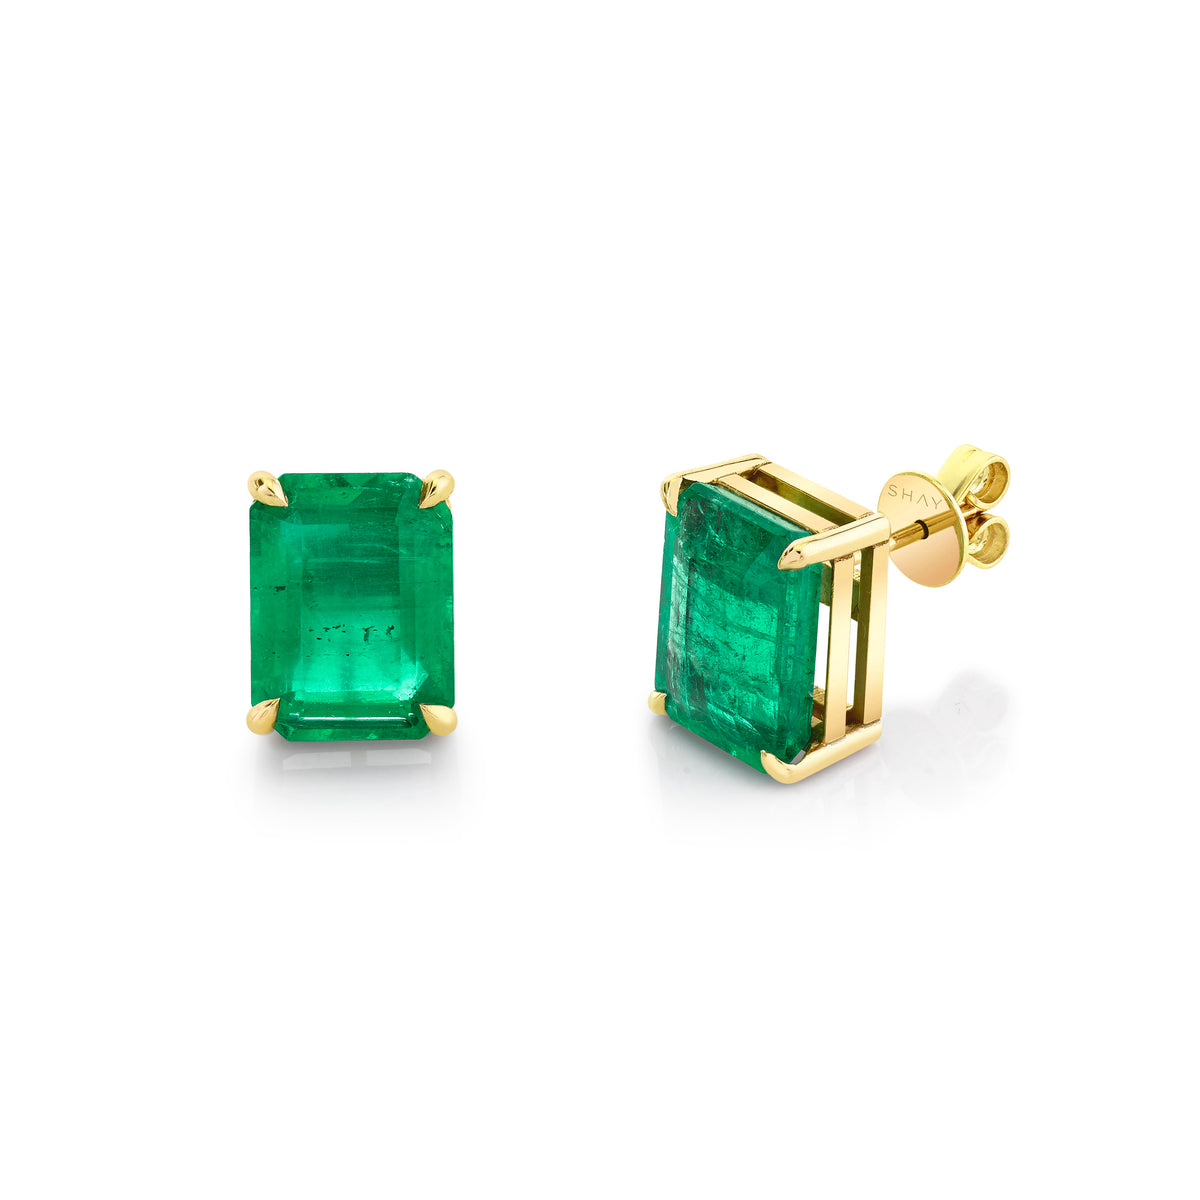 EMERALD SOLITAIRE STUDS, 8cts